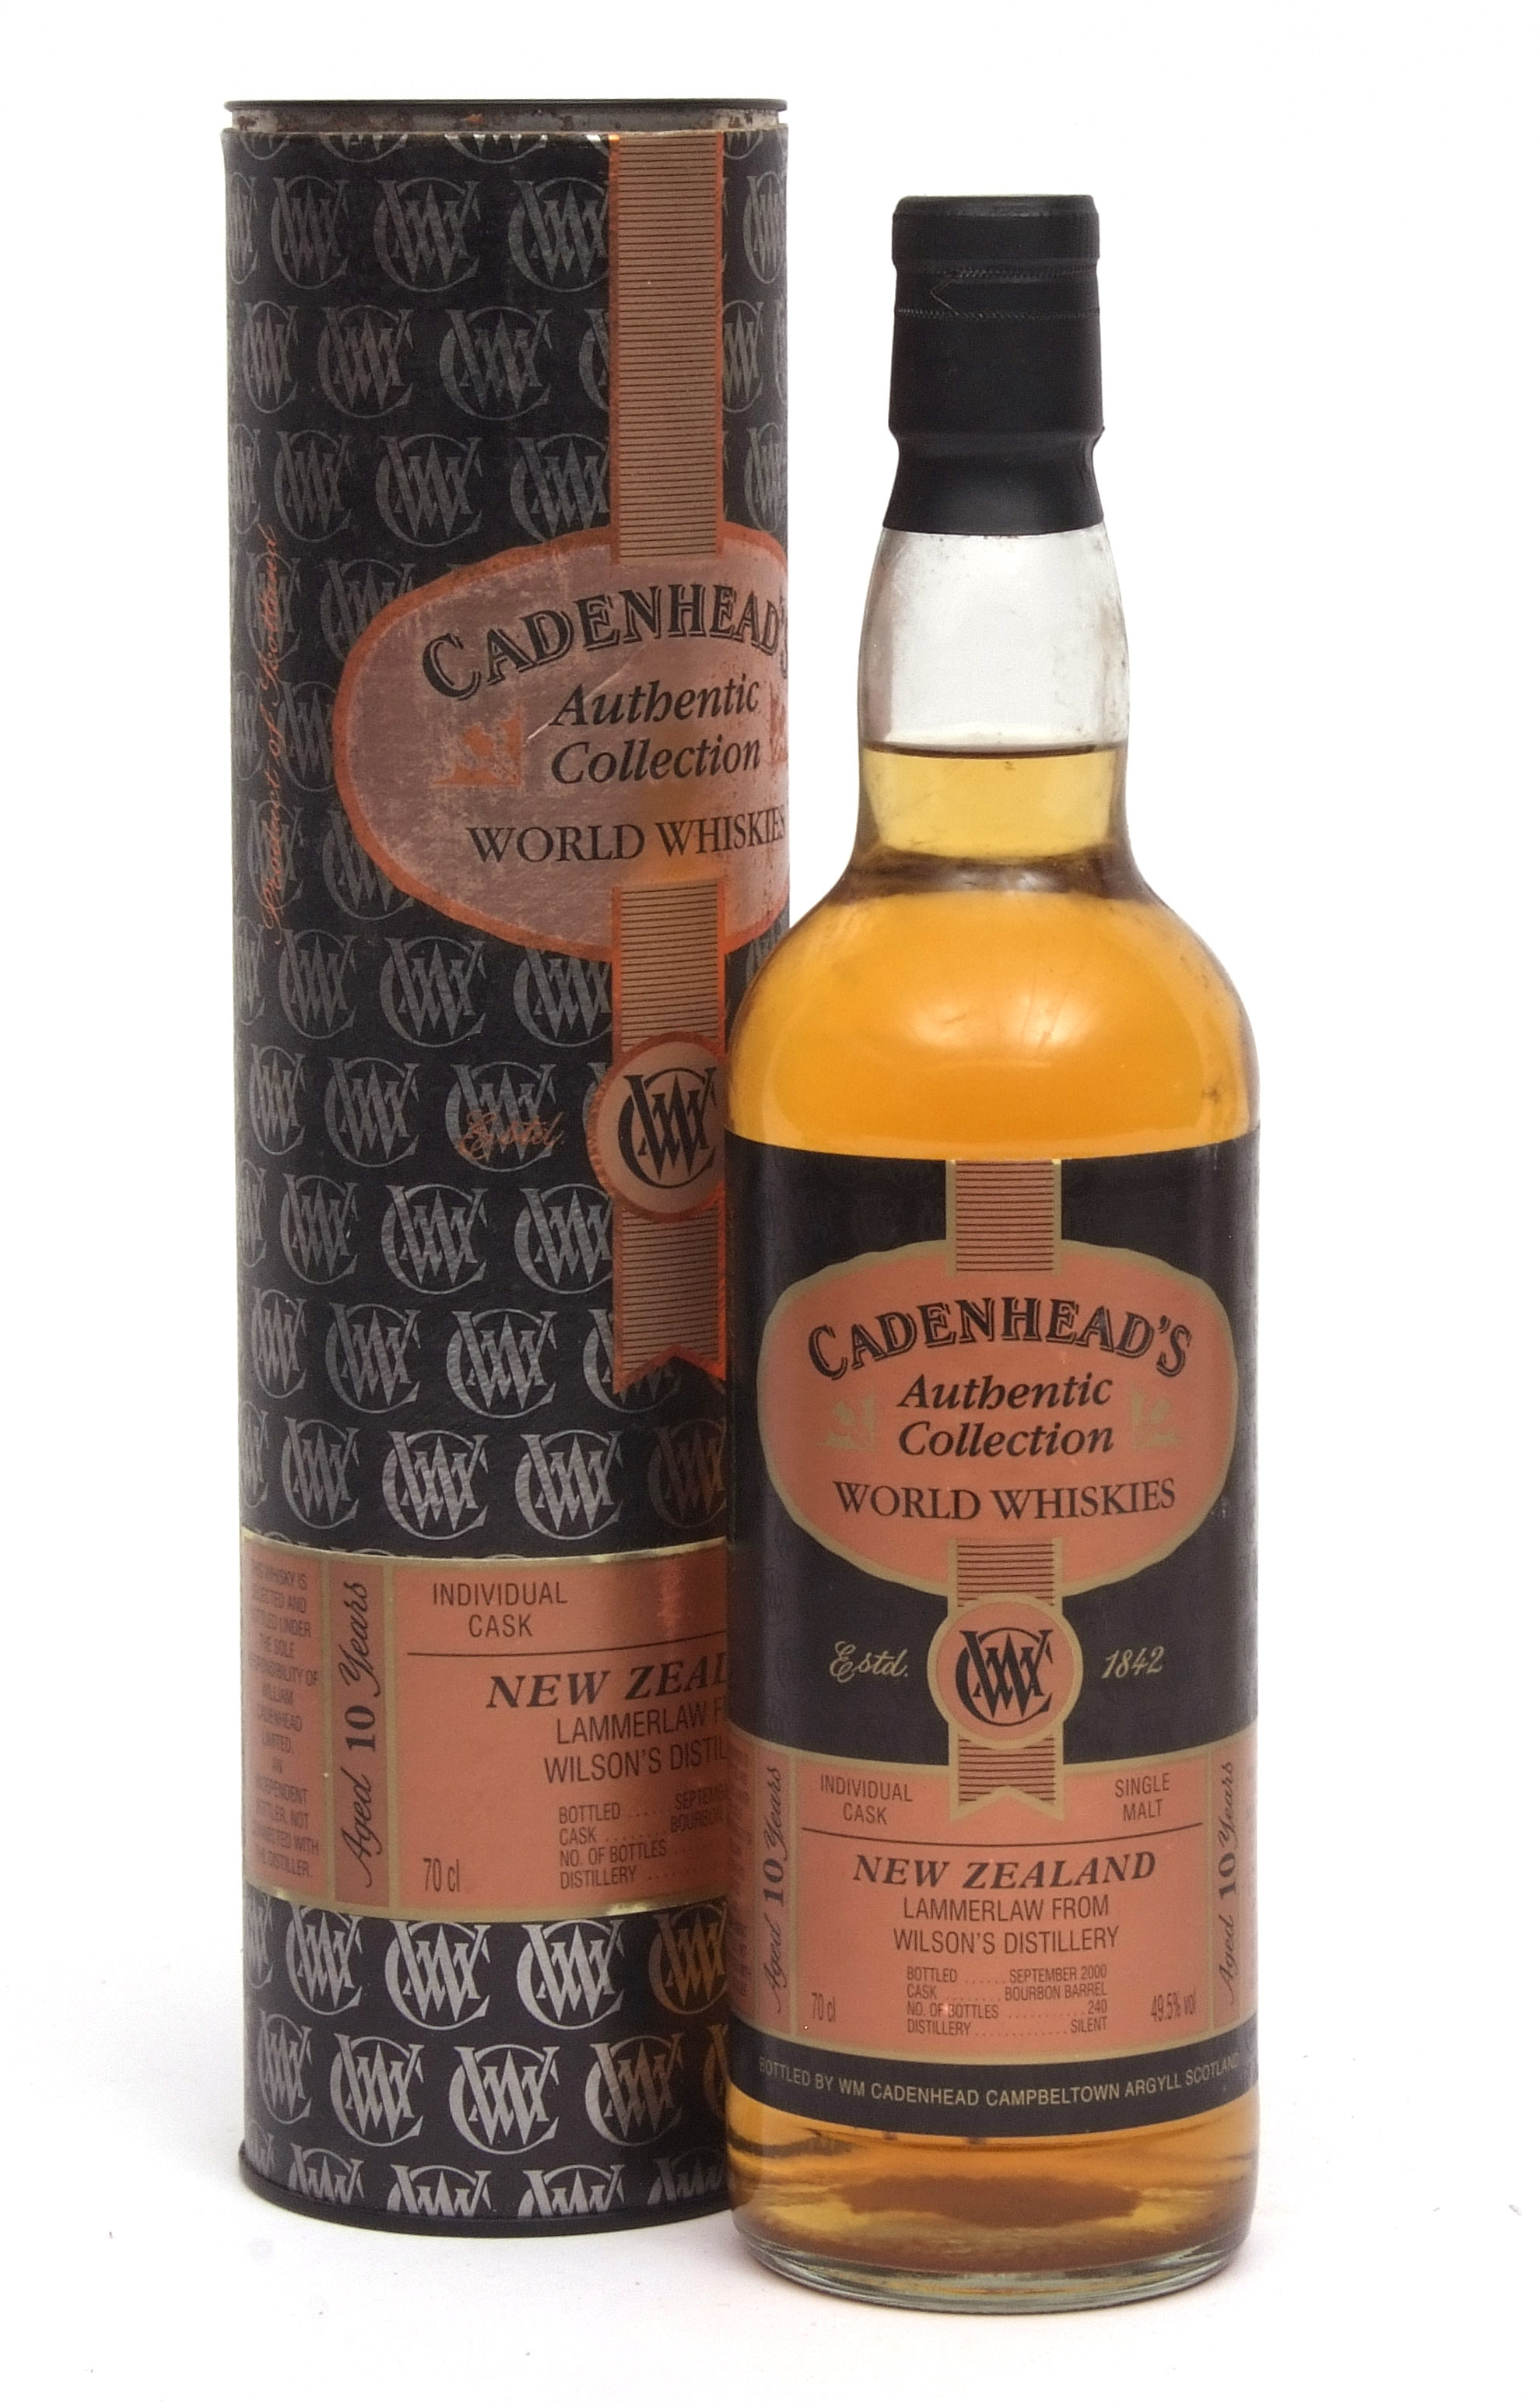 Lammerlaw from Wilson's Distillery (New Zealand) Cadenheads World Whiskies authentic collection,